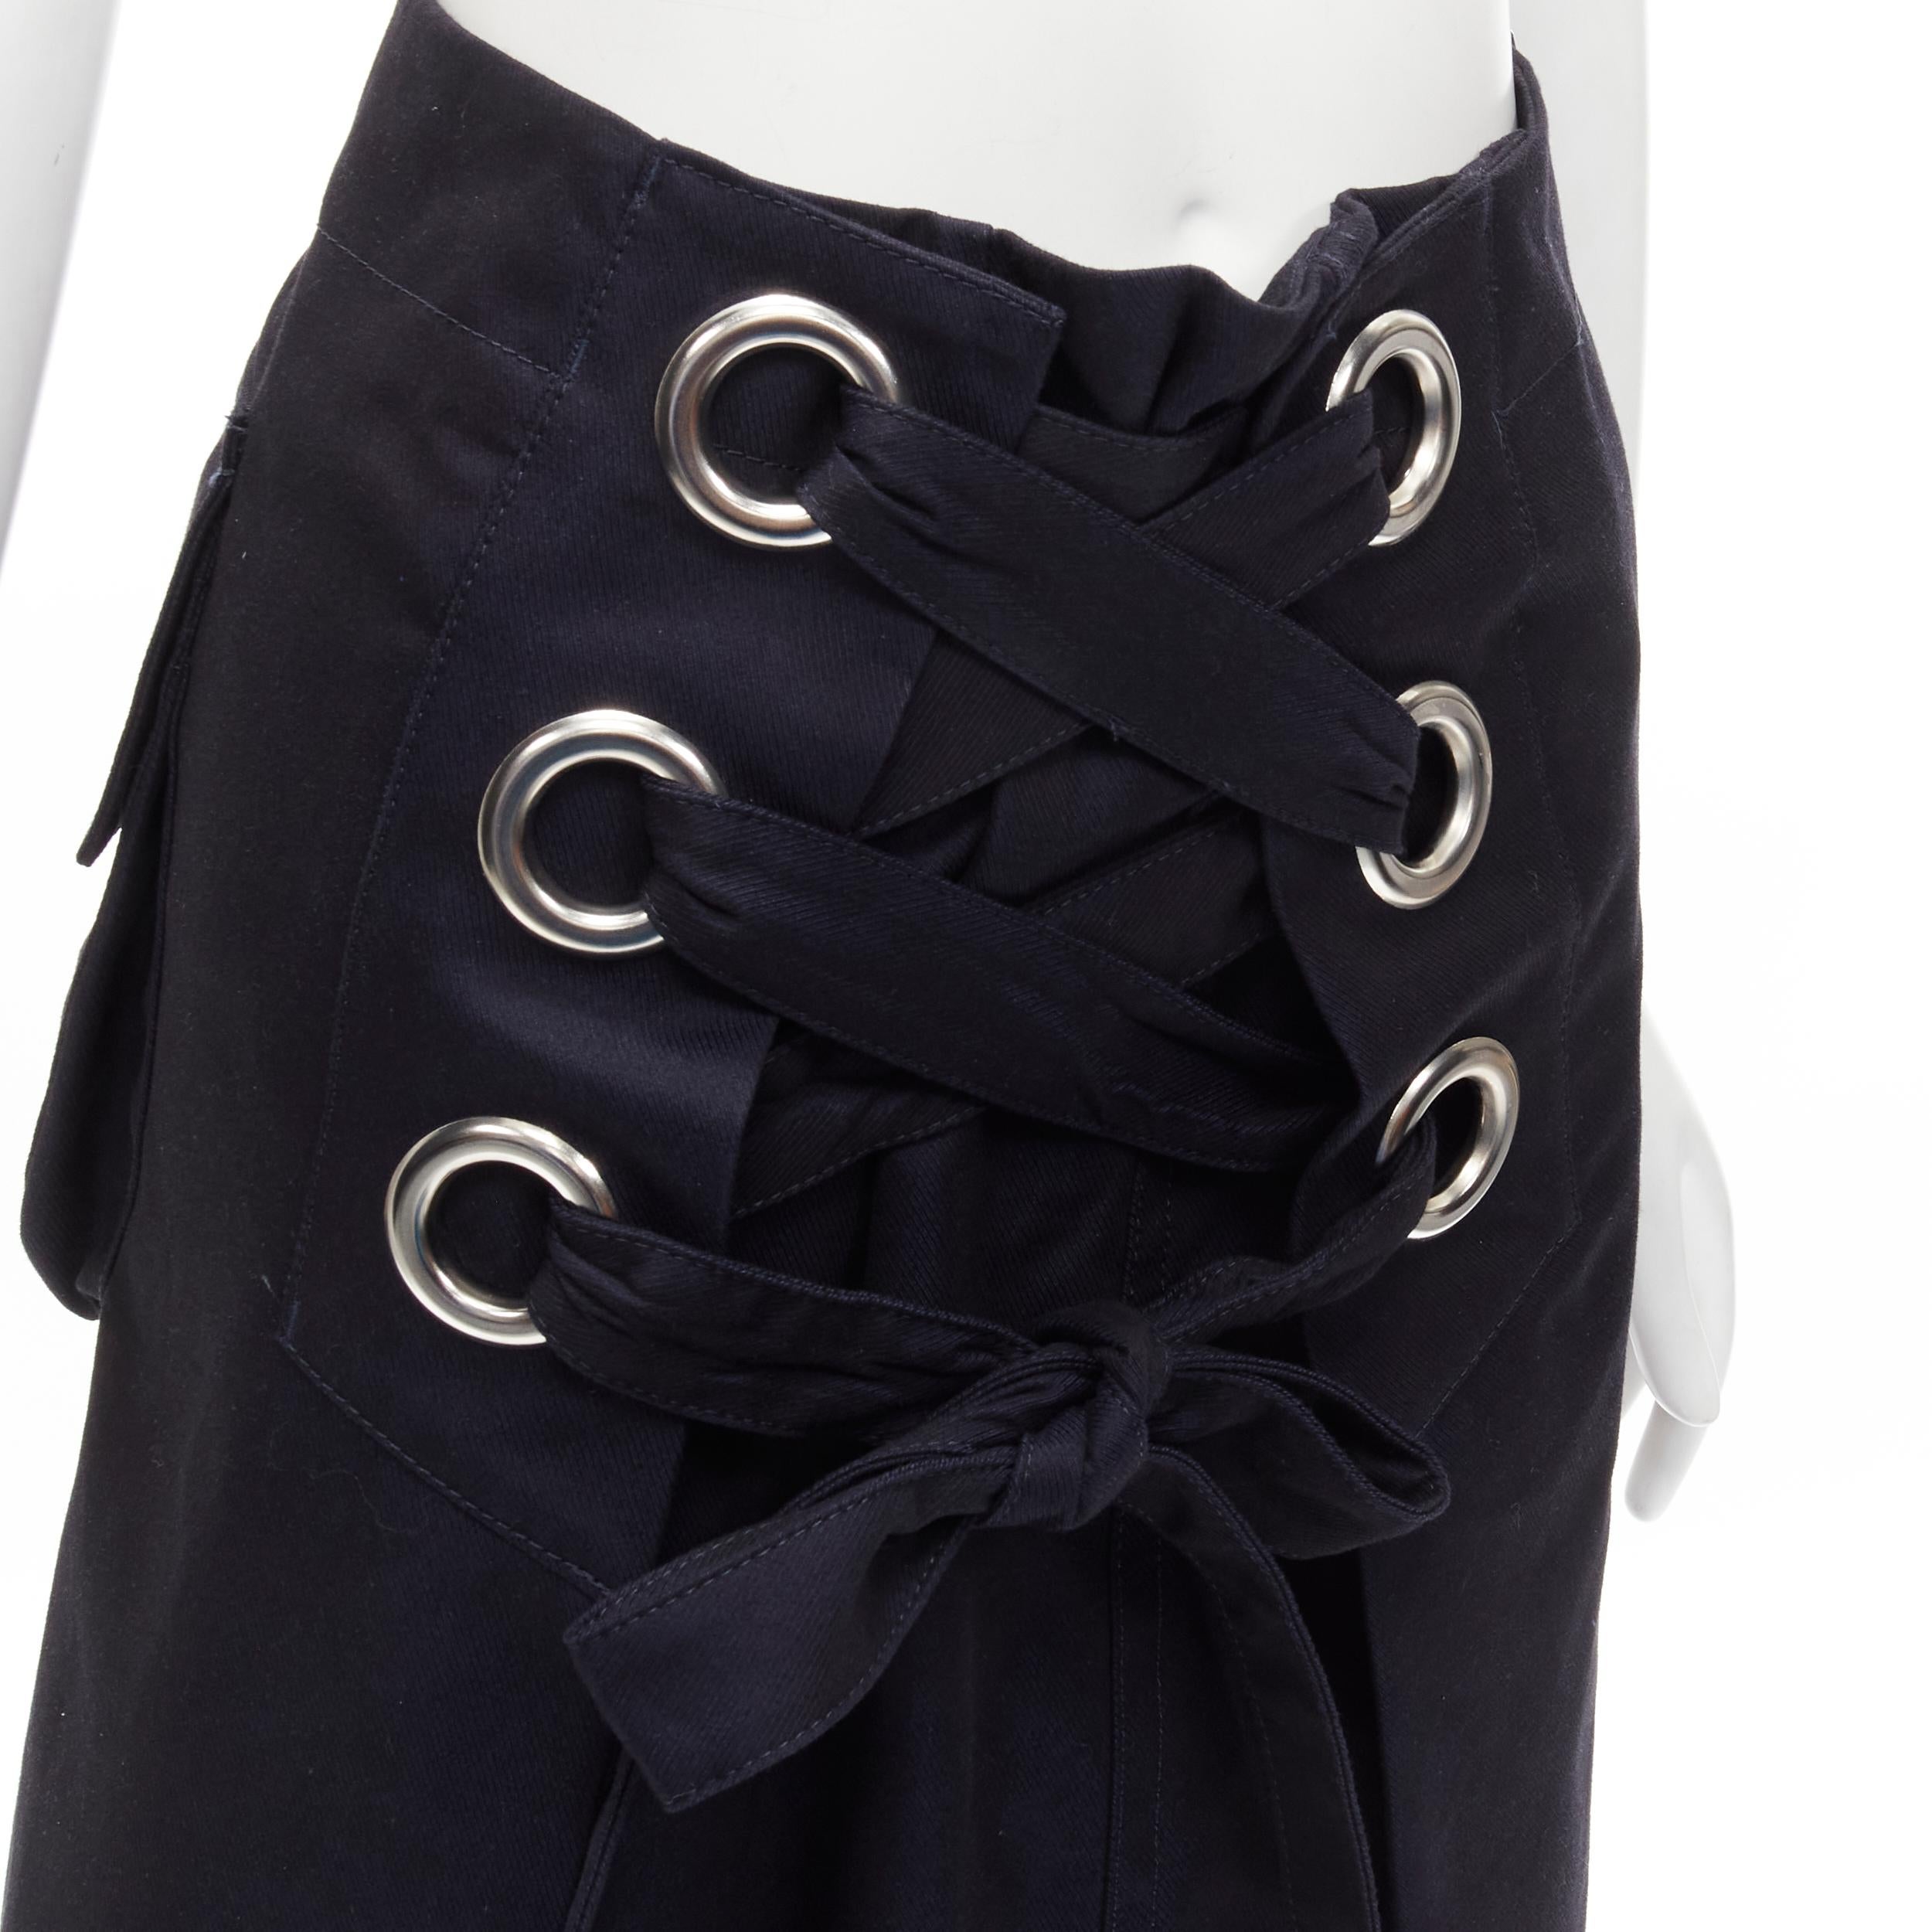 SACAI XL silver grommet lace front A-line skirt S
Brand: Sacai
Designer: Chitose Abe
Material: Feels like cotton
Color: Navy
Pattern: Solid
Closure: Zip
Extra Detail: Silver grommet detailing. lace front. Side zip closure. Snap button back pocket.